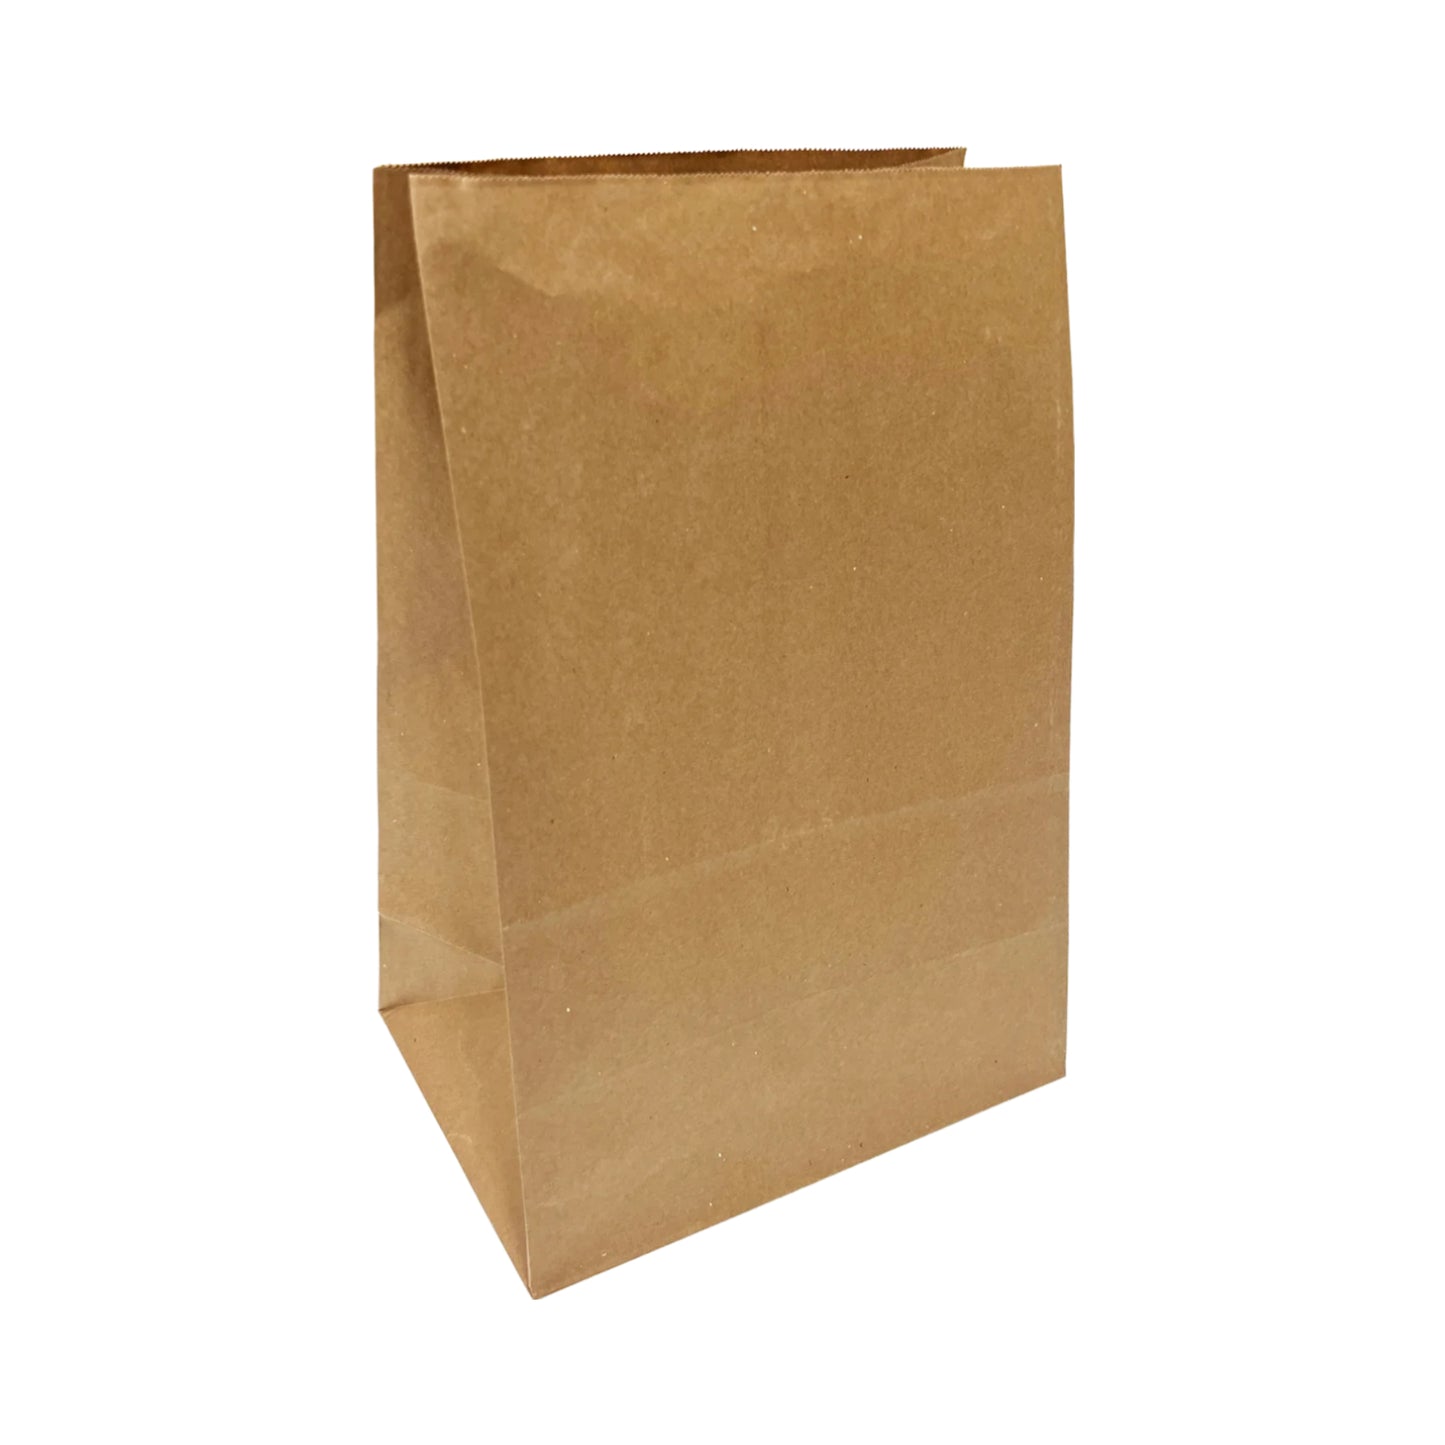 500pcs #20 Grocery Bags 8.25x5x15.75 inches; $0.07/pc